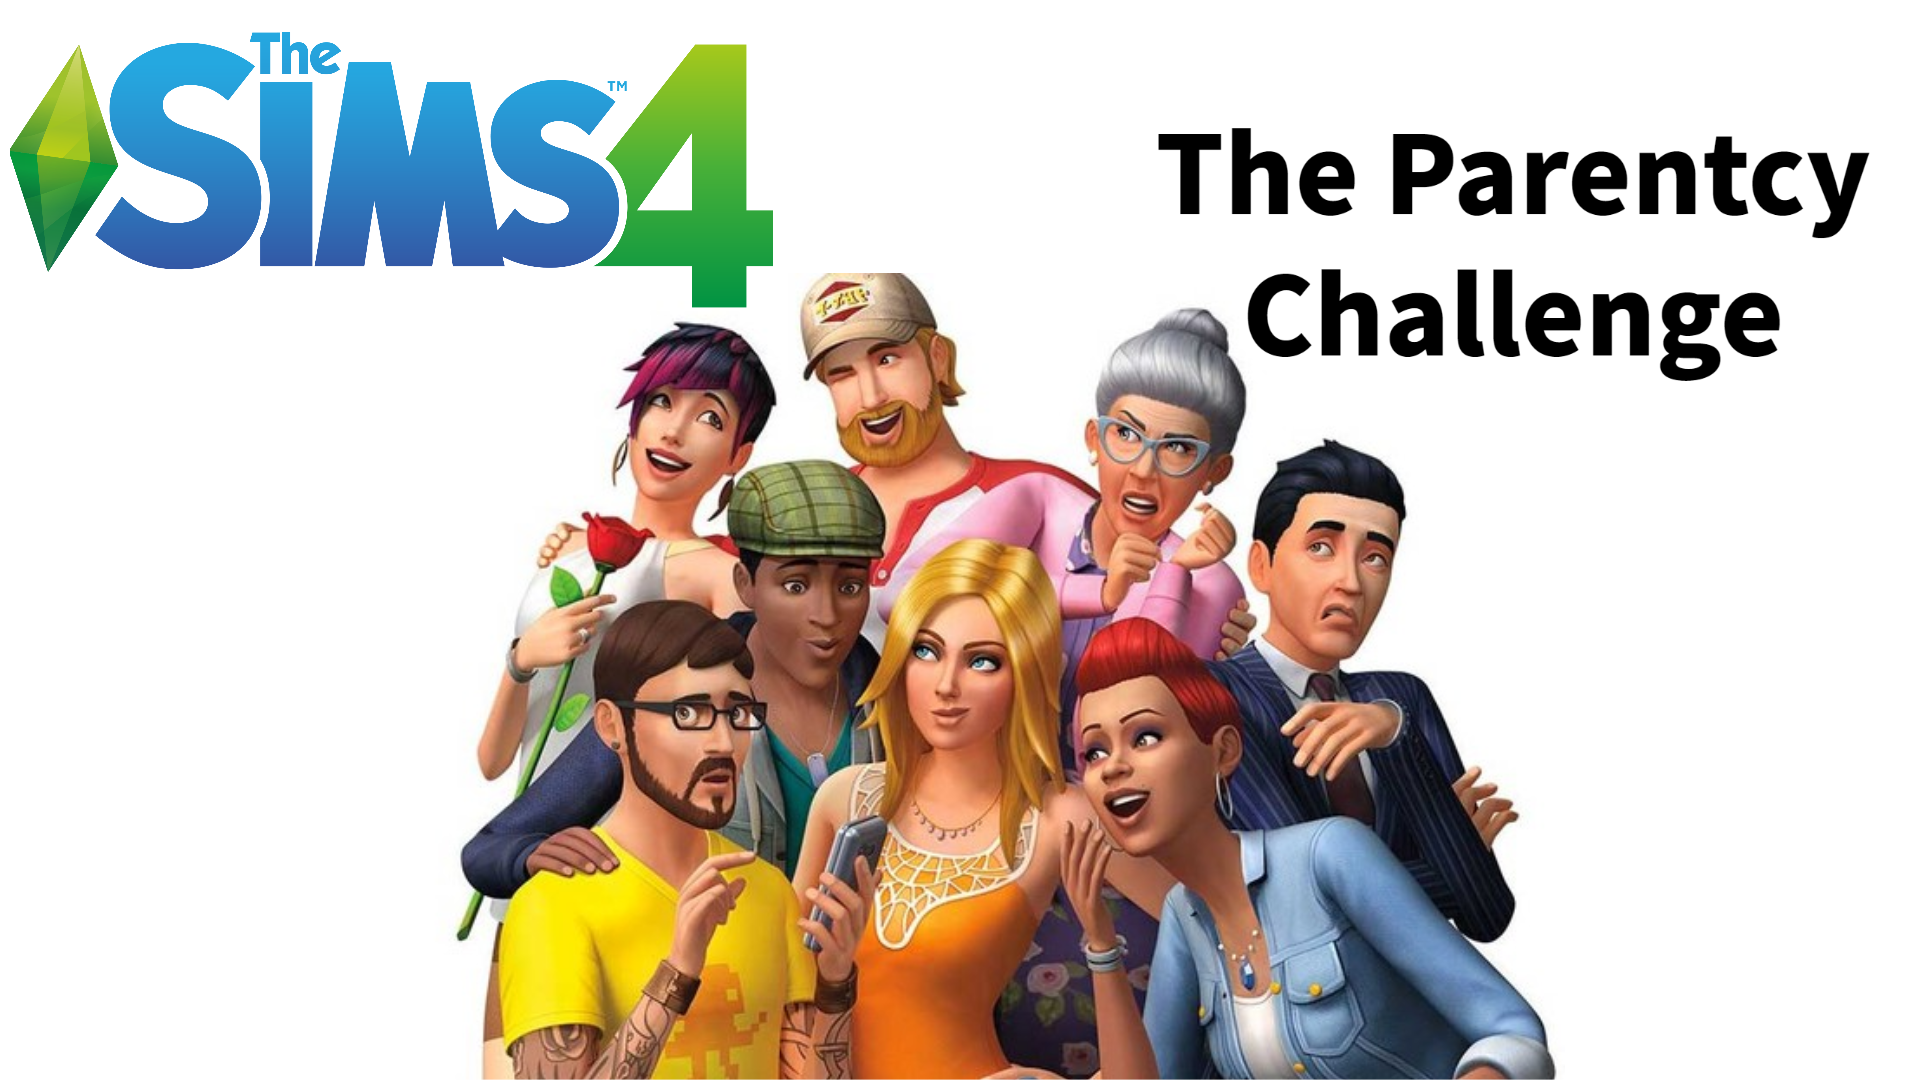 The Sims 4 Parentcy Challenge